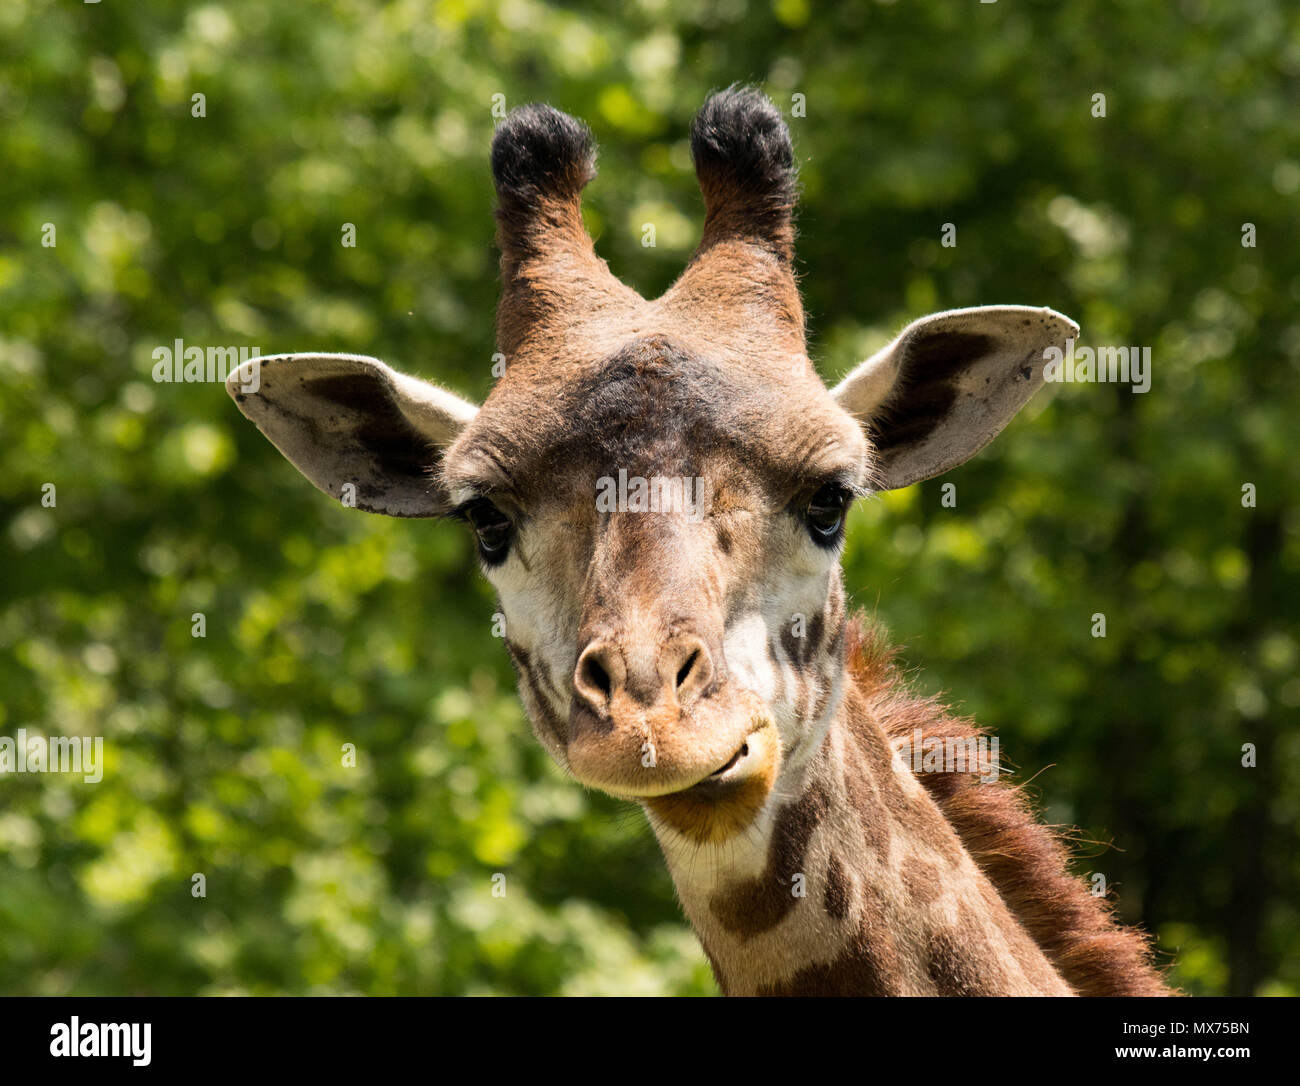 Young Giraffe staring ifrom a distance Stock Photo